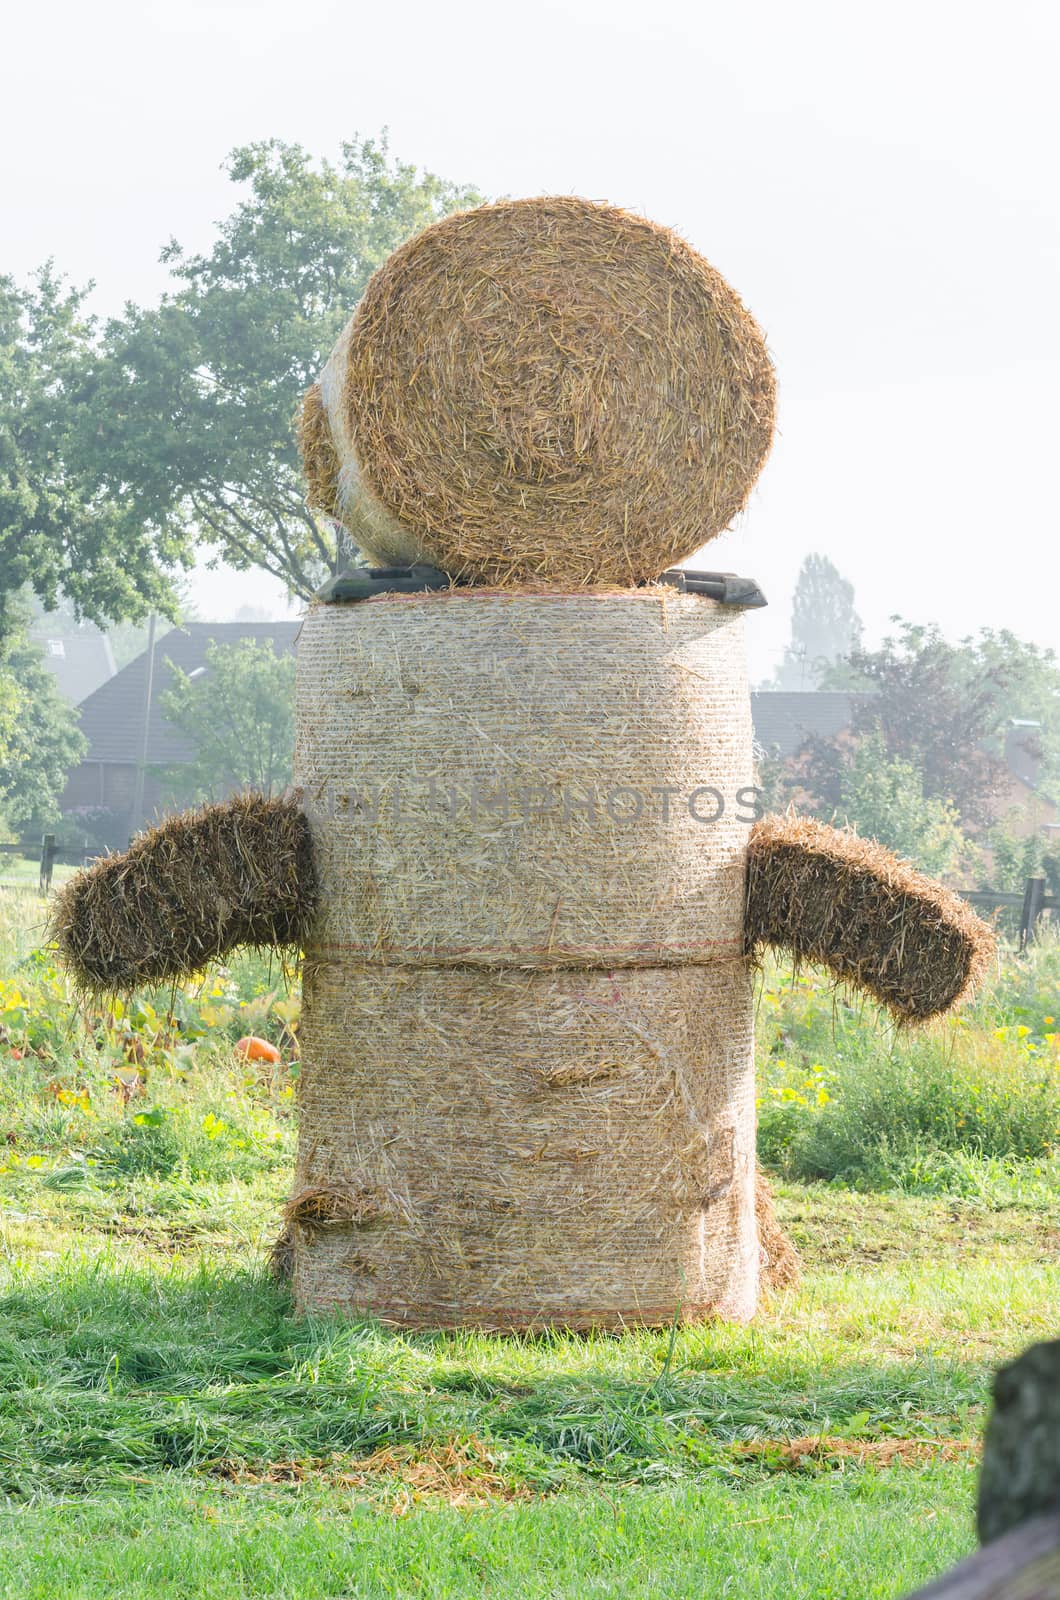 Hay bale figure, in the countryside.